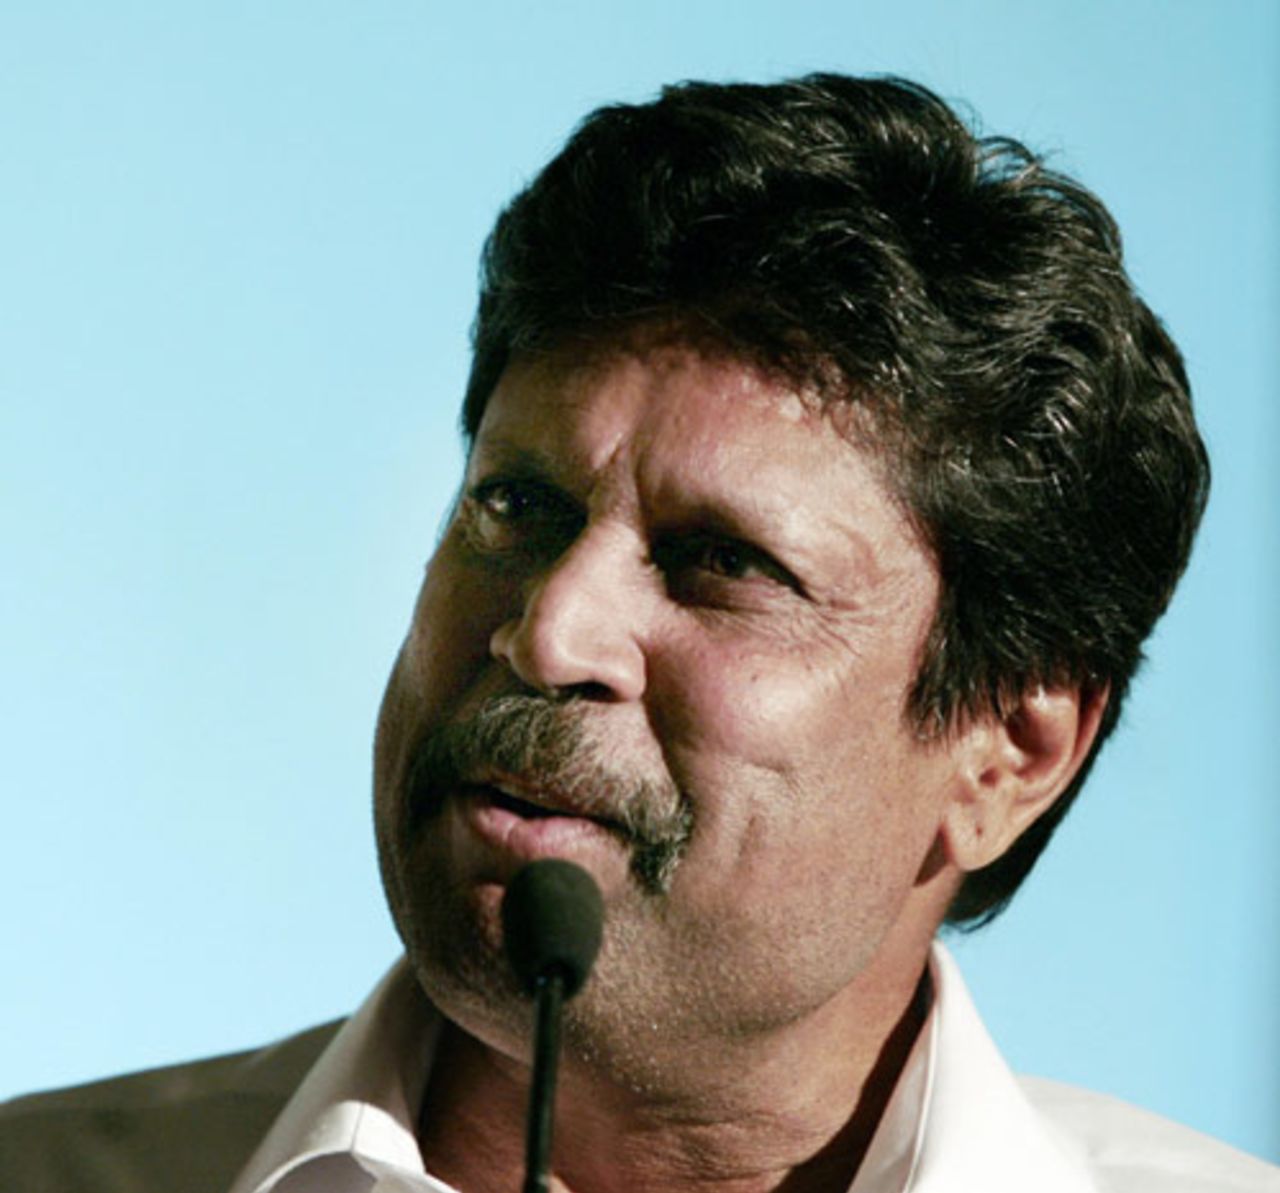 Kapil Dev addresses the media at a function celebrating the silver jubilee of the 1983 World Cup win, Bangalore, June 3, 2008